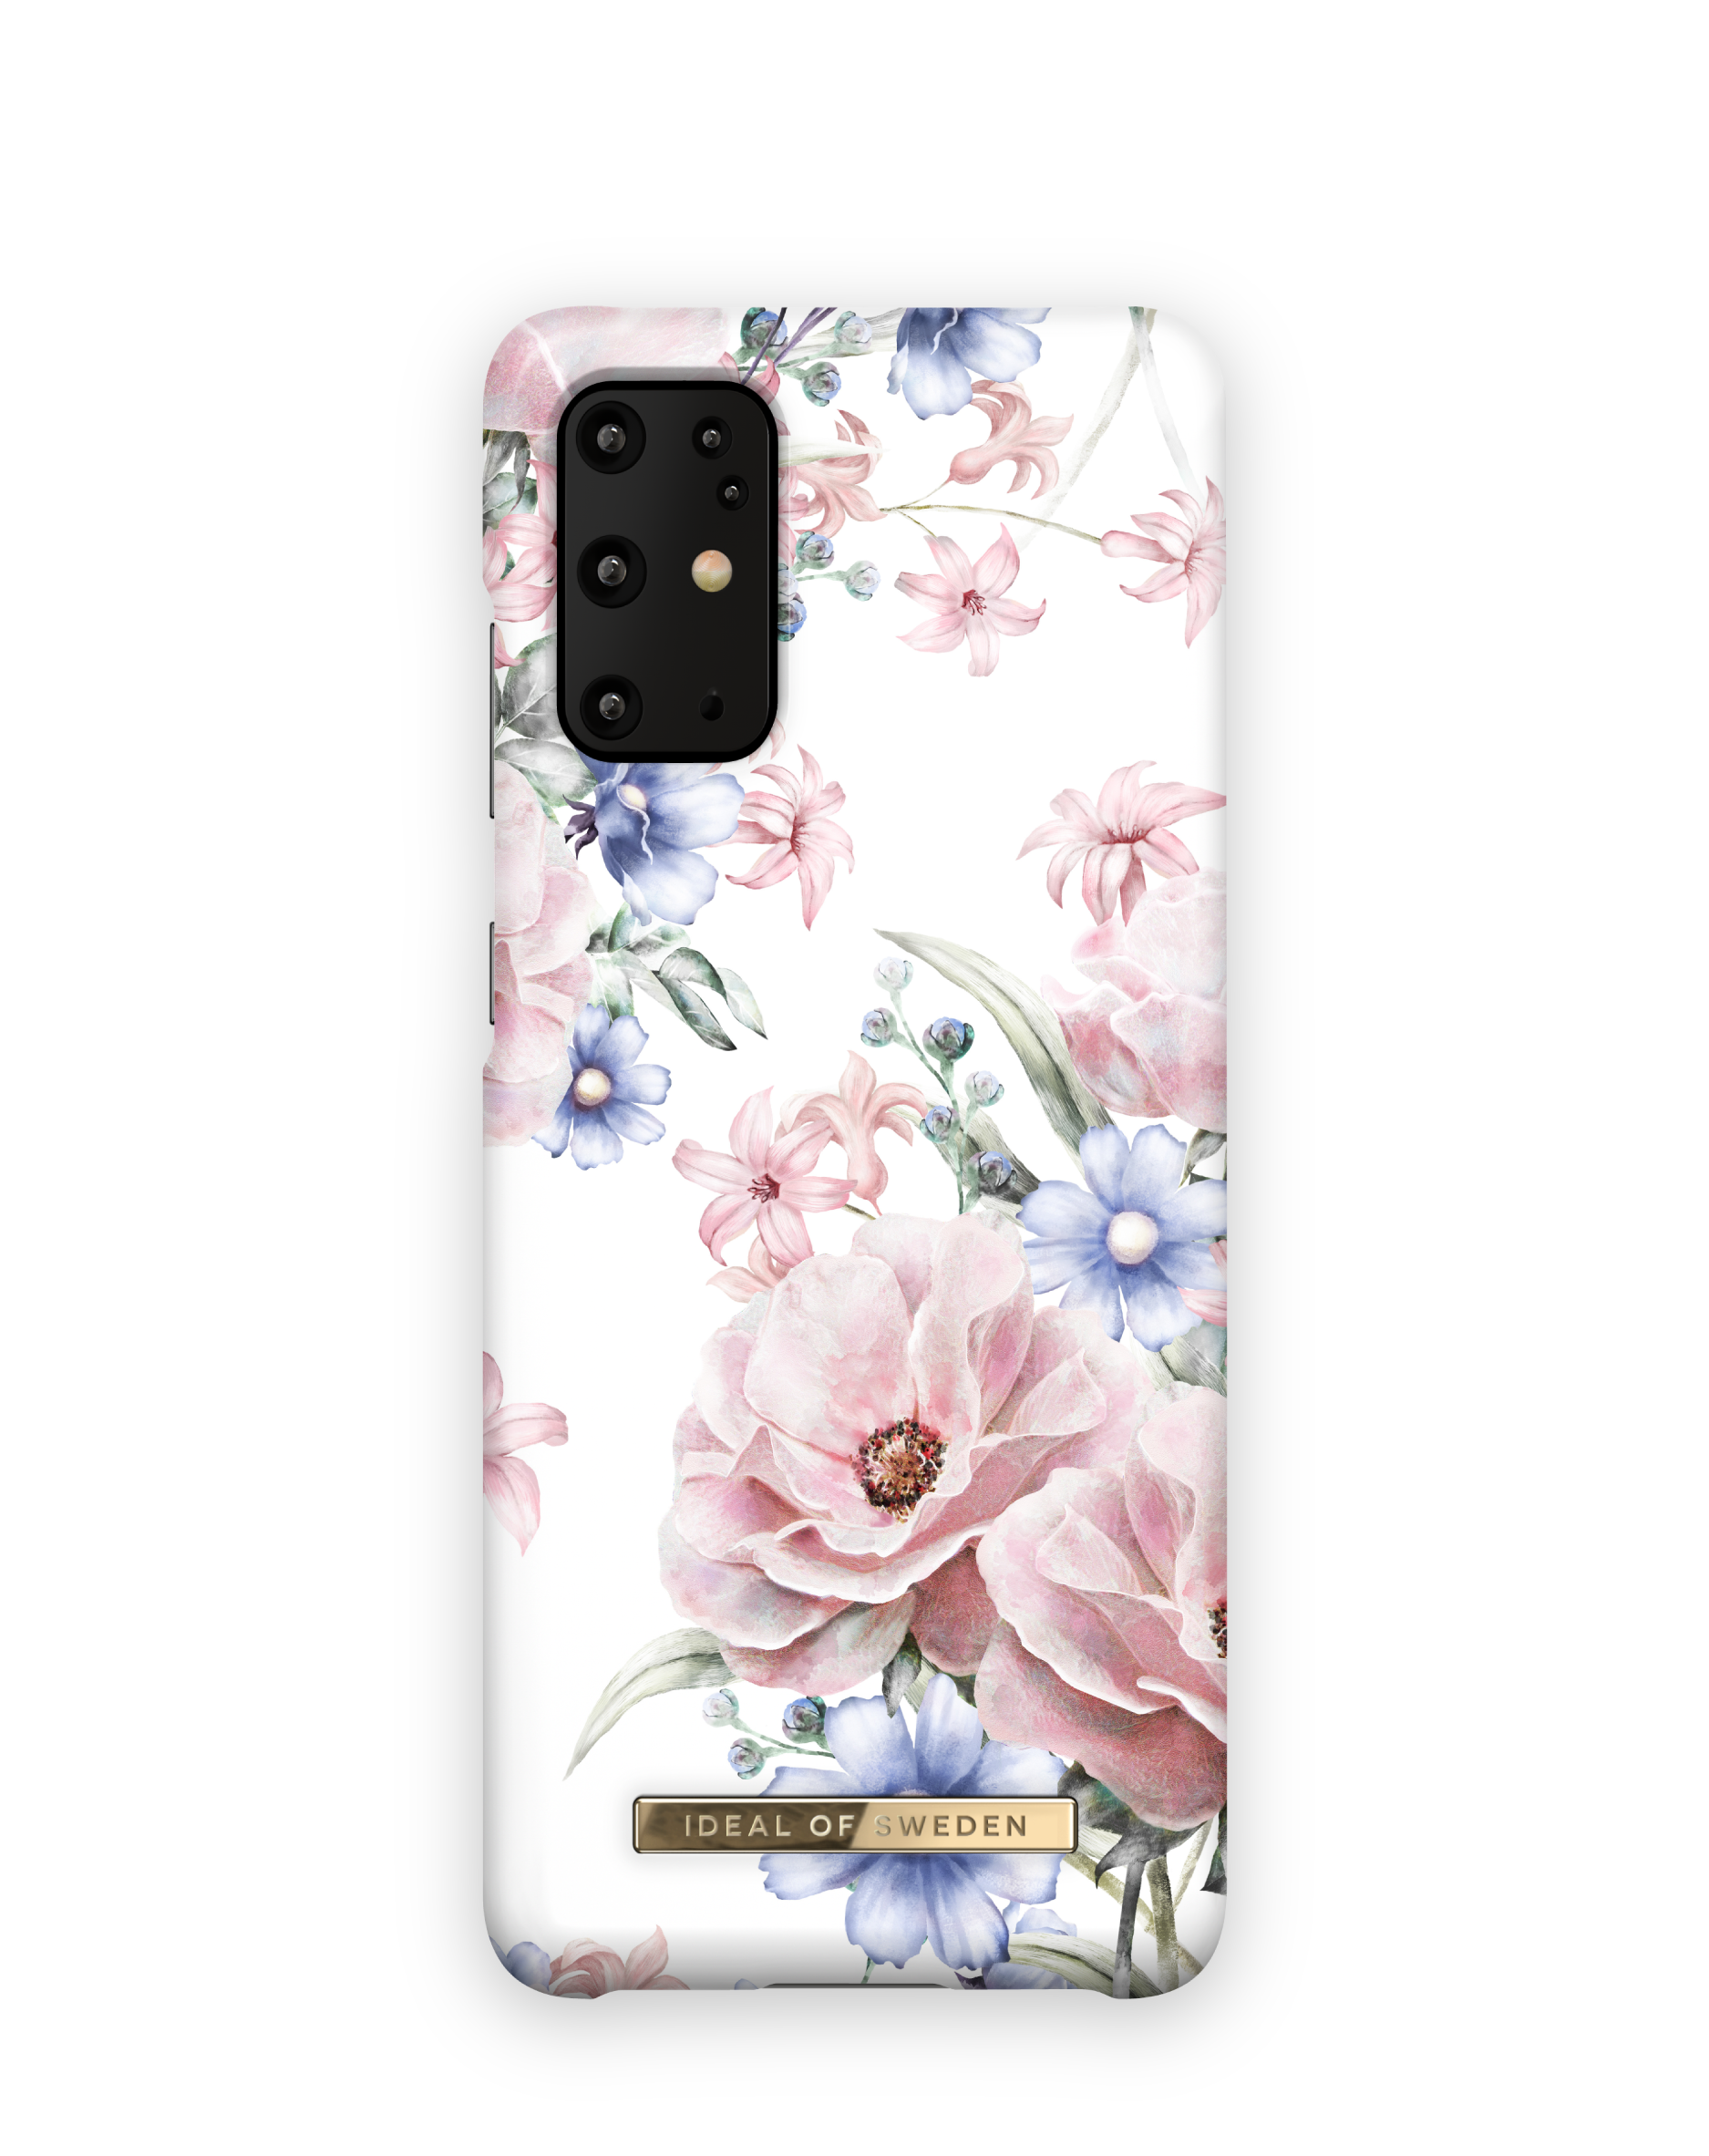 SWEDEN IDEAL Samsung, Galaxy Backcover, OF Floral S20+, Romance IDFCS17-S11-58,